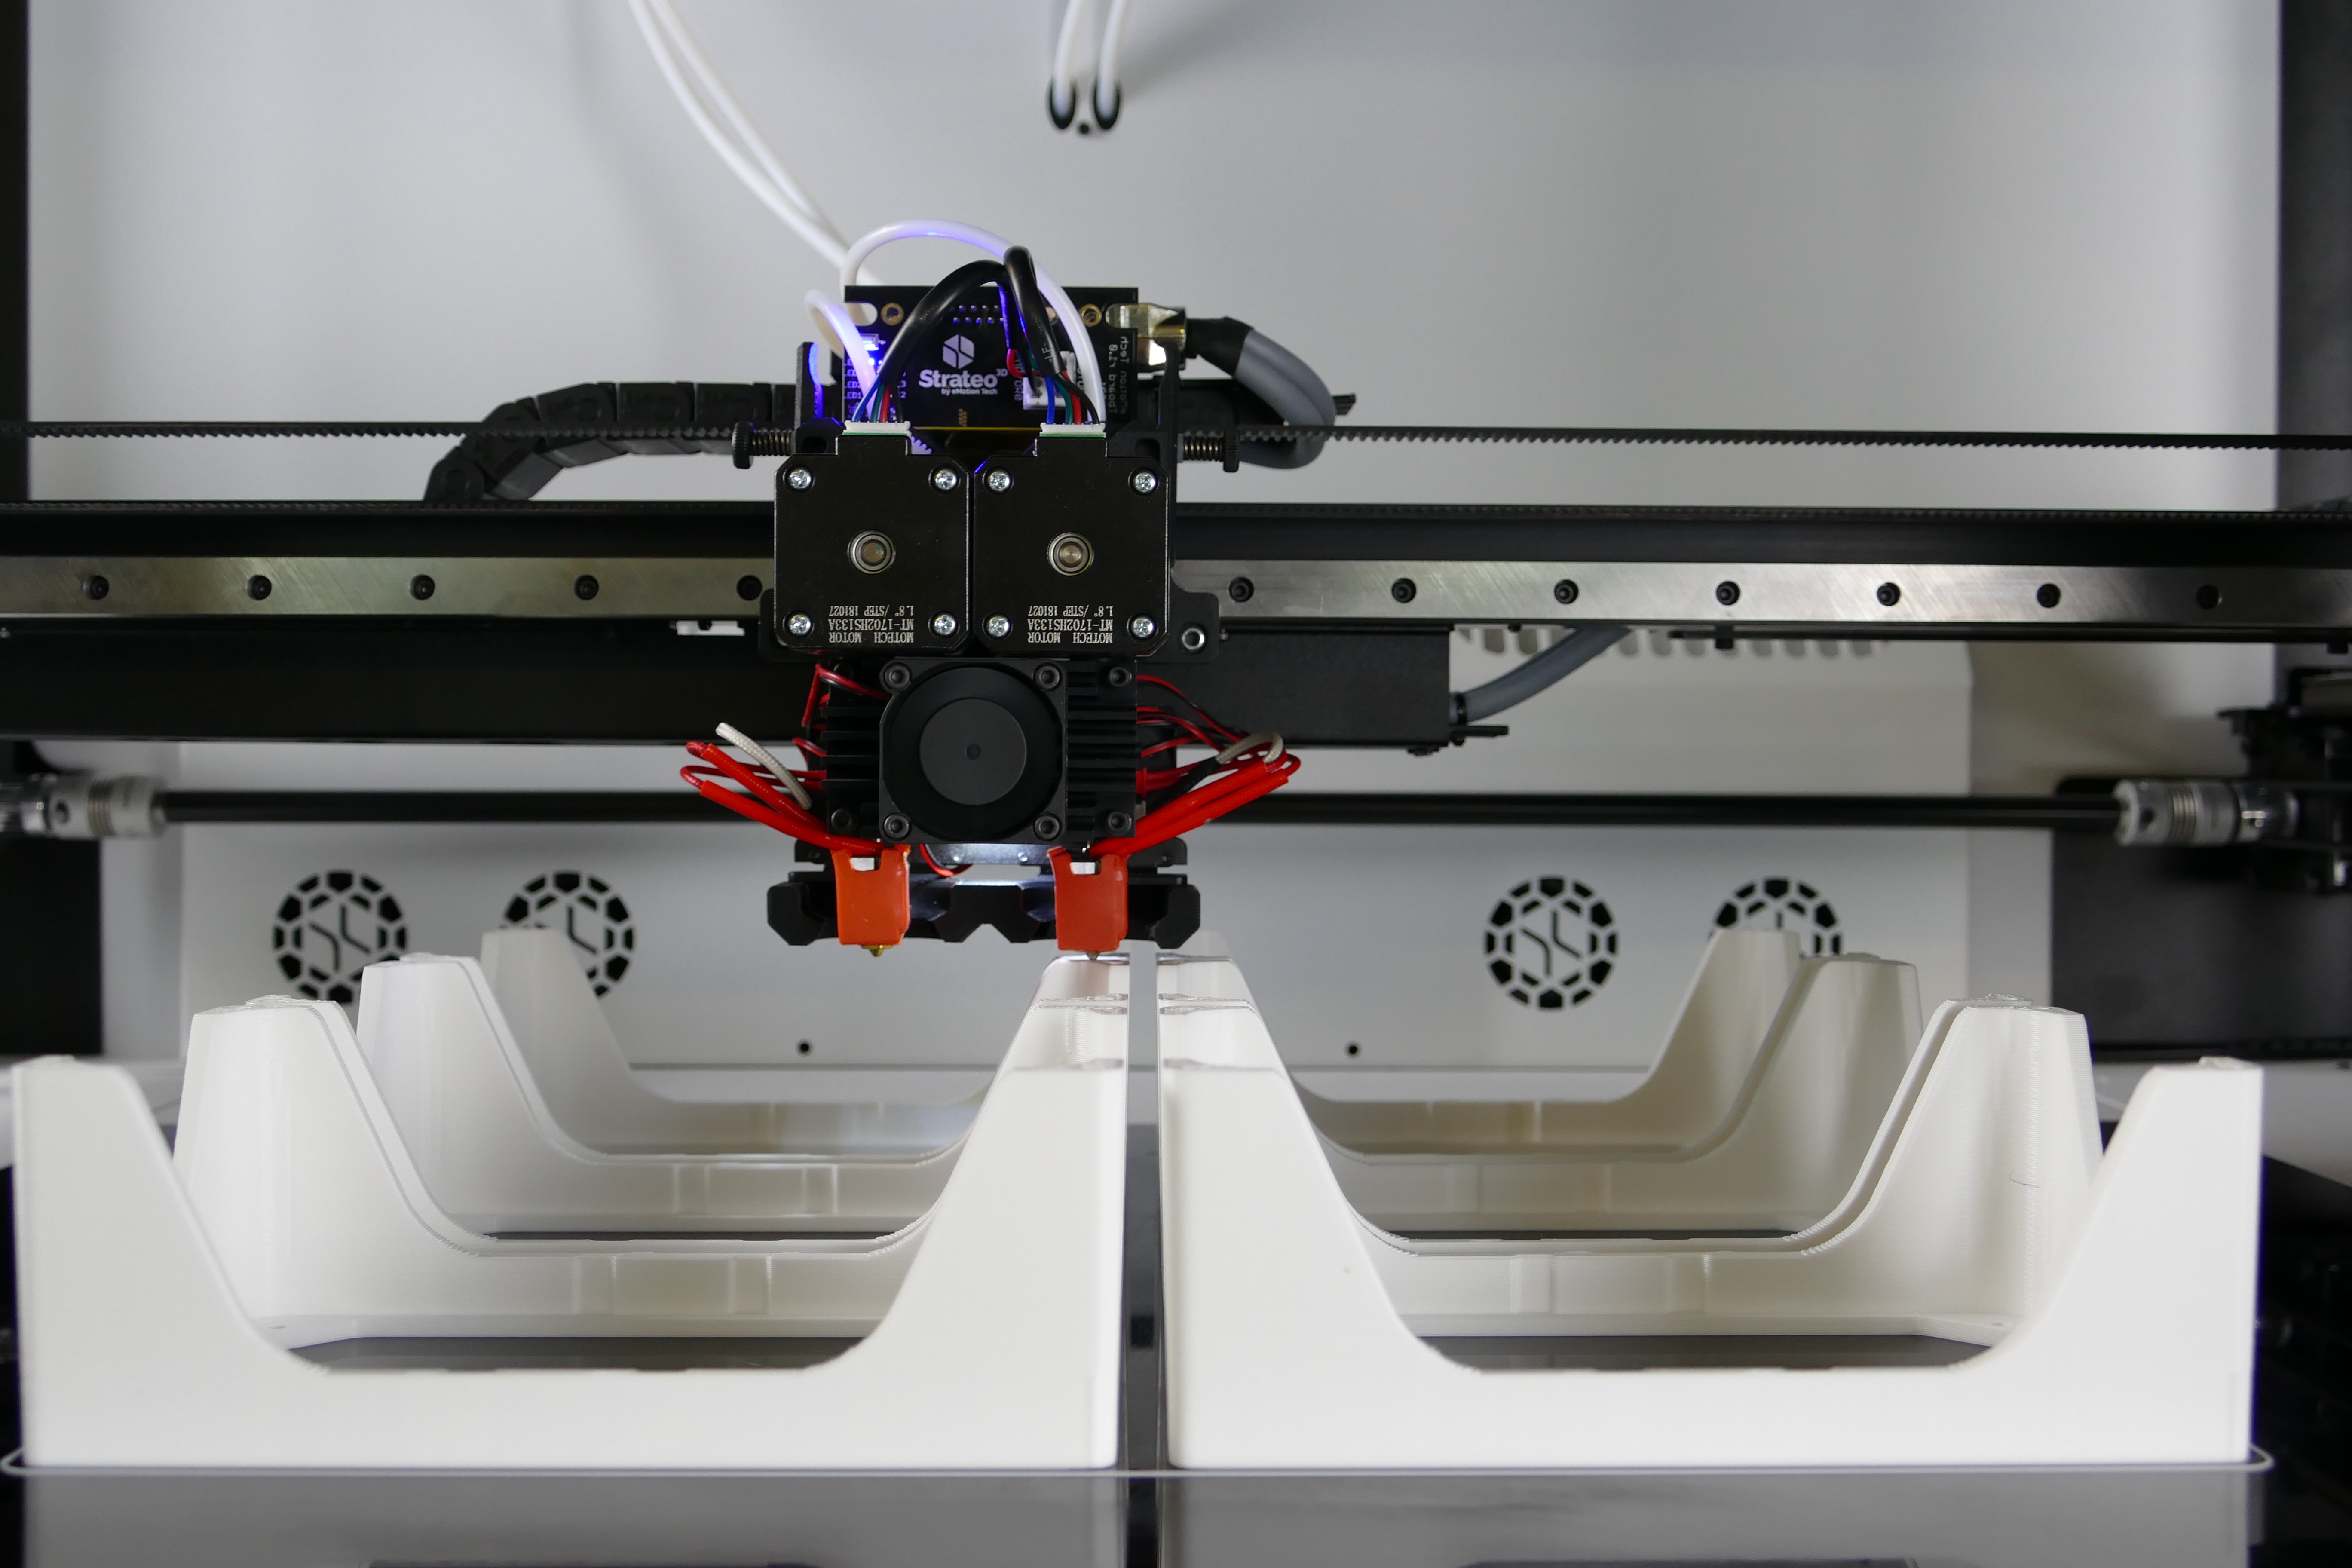 2023 Trends for 3D Printing